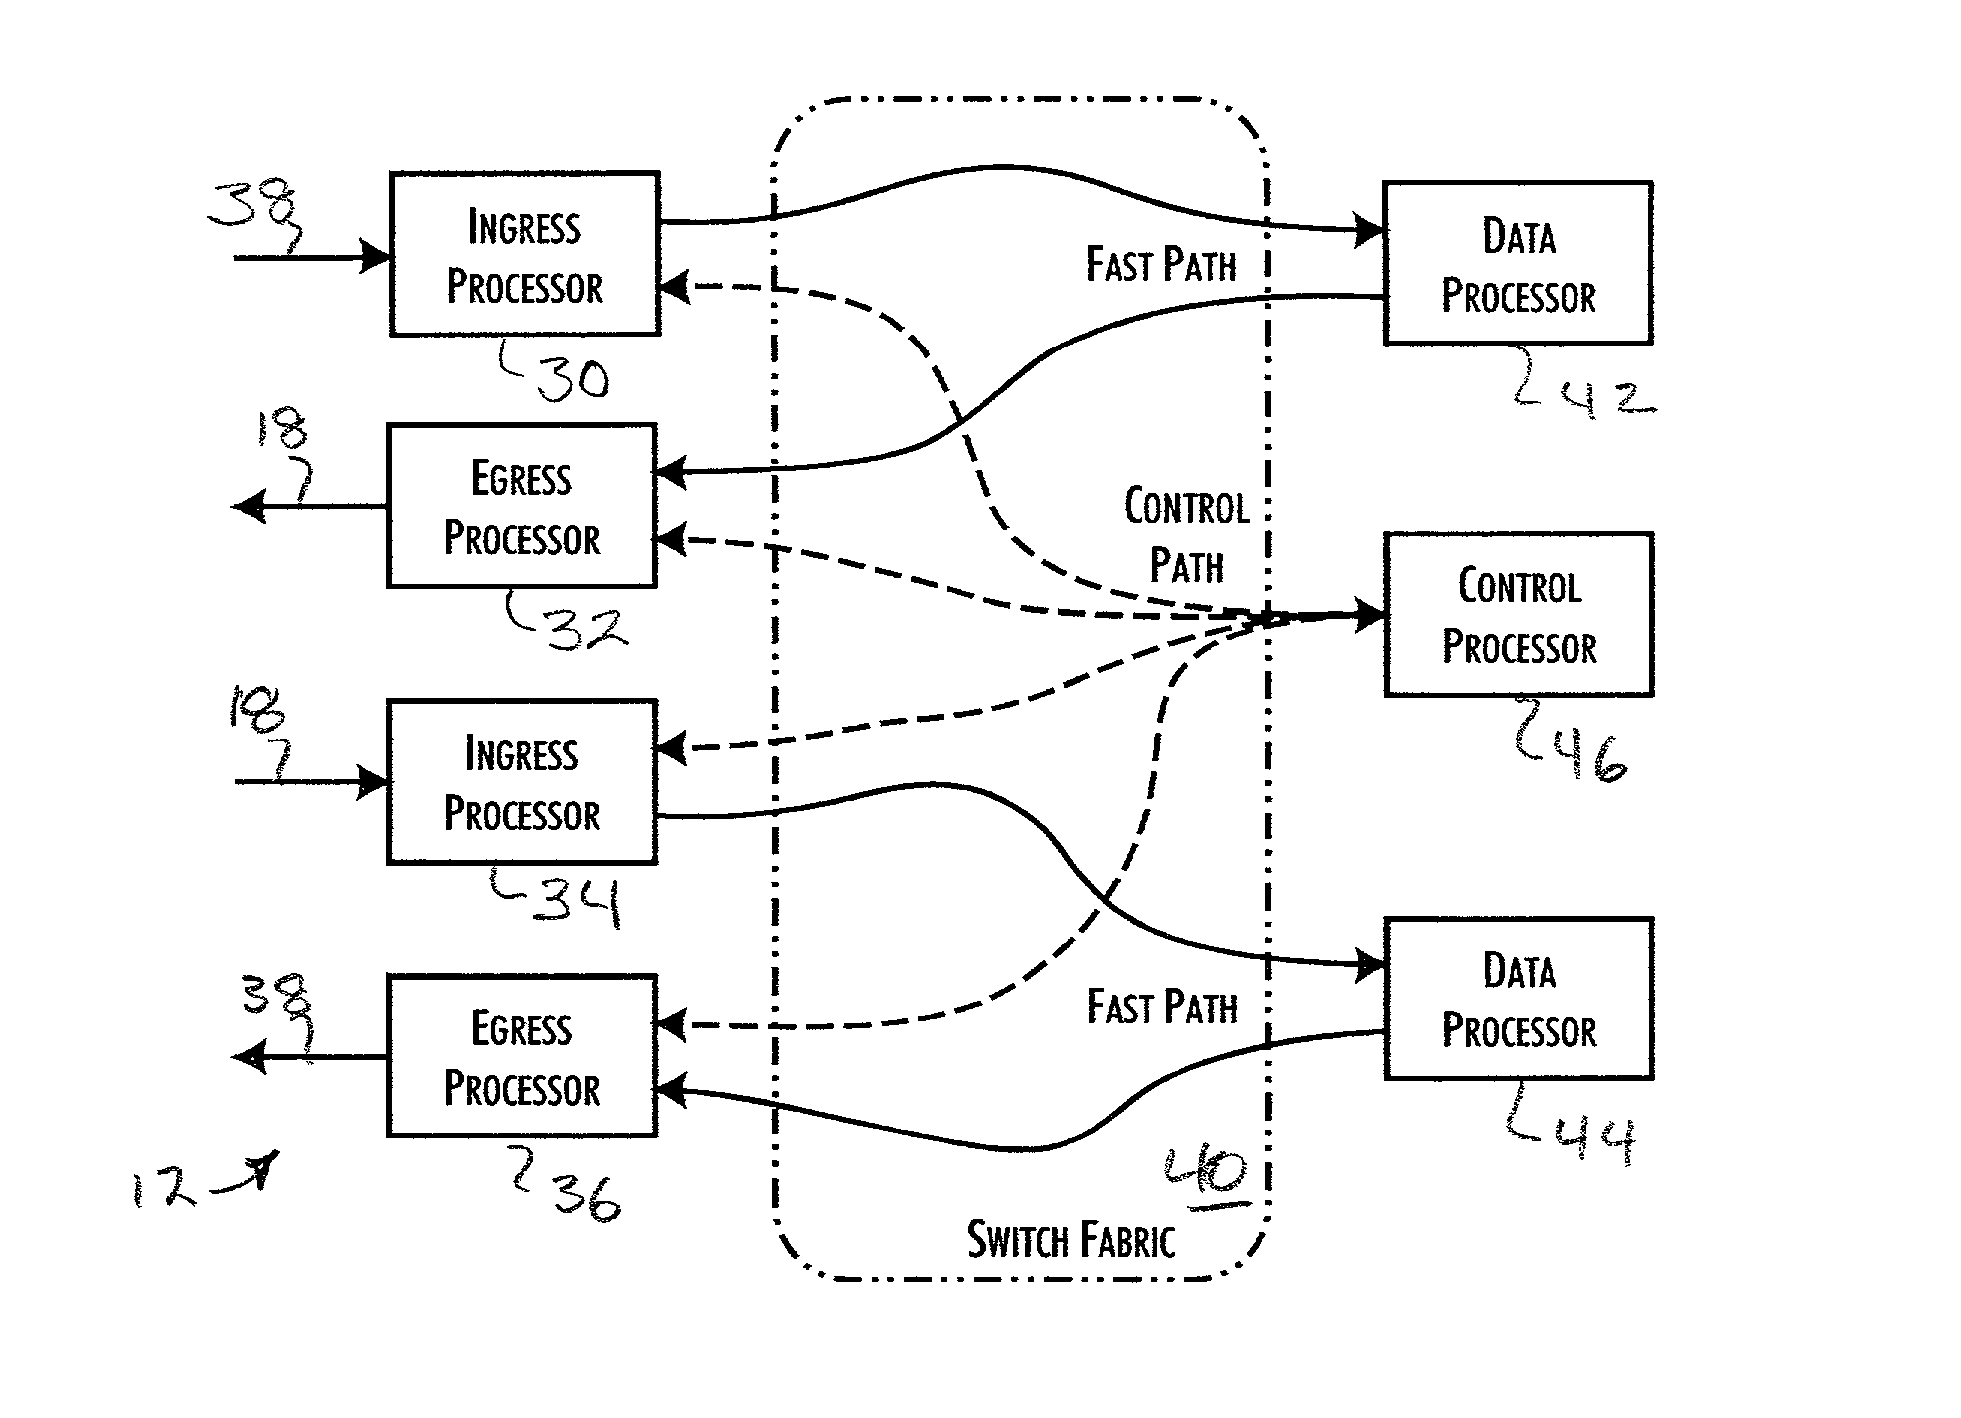 Load balanced scalable network gateway processor architecture